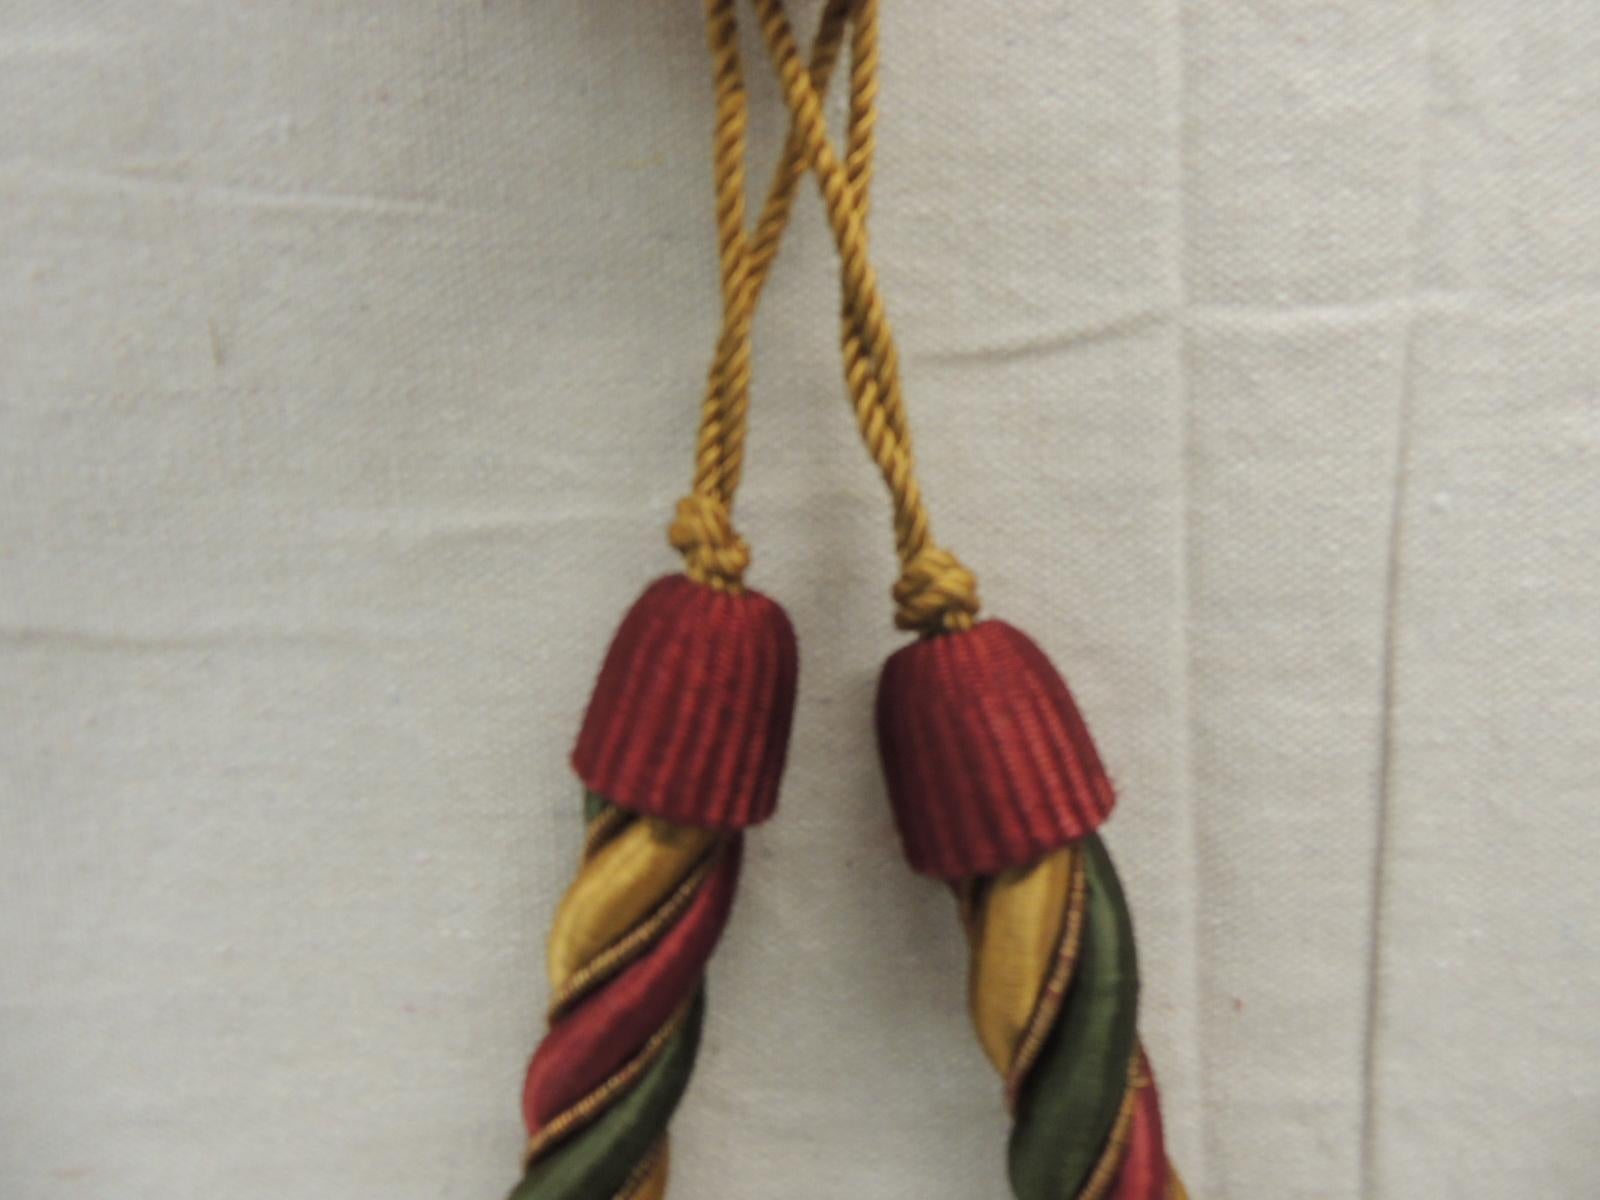 Asian Pair of Gold, Red and Green Rope Curtain Holders